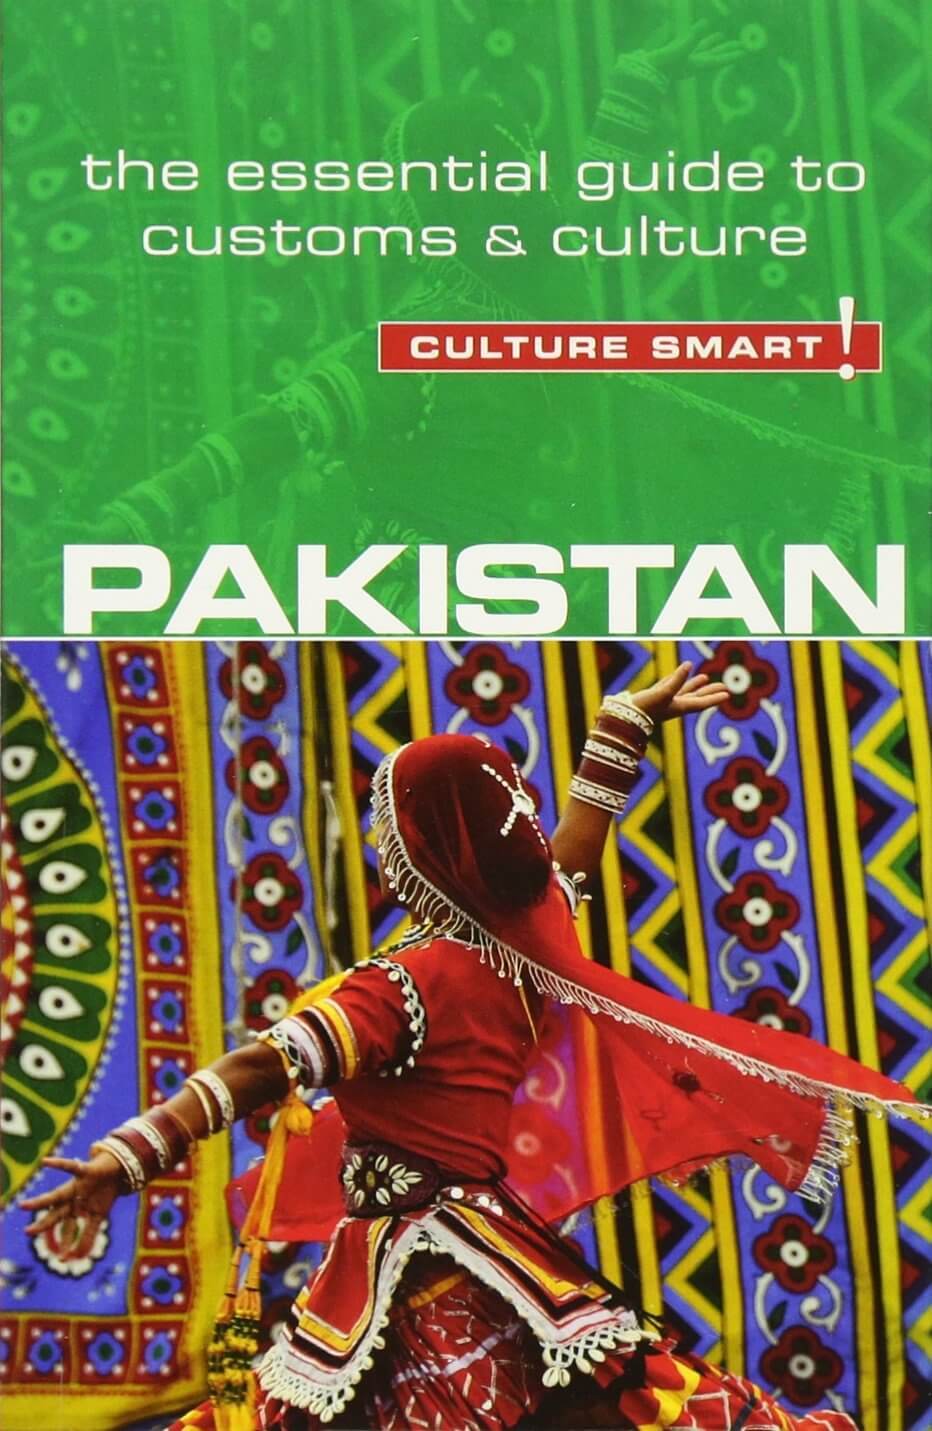 The 23 best books on Pakistan - Against the Compass